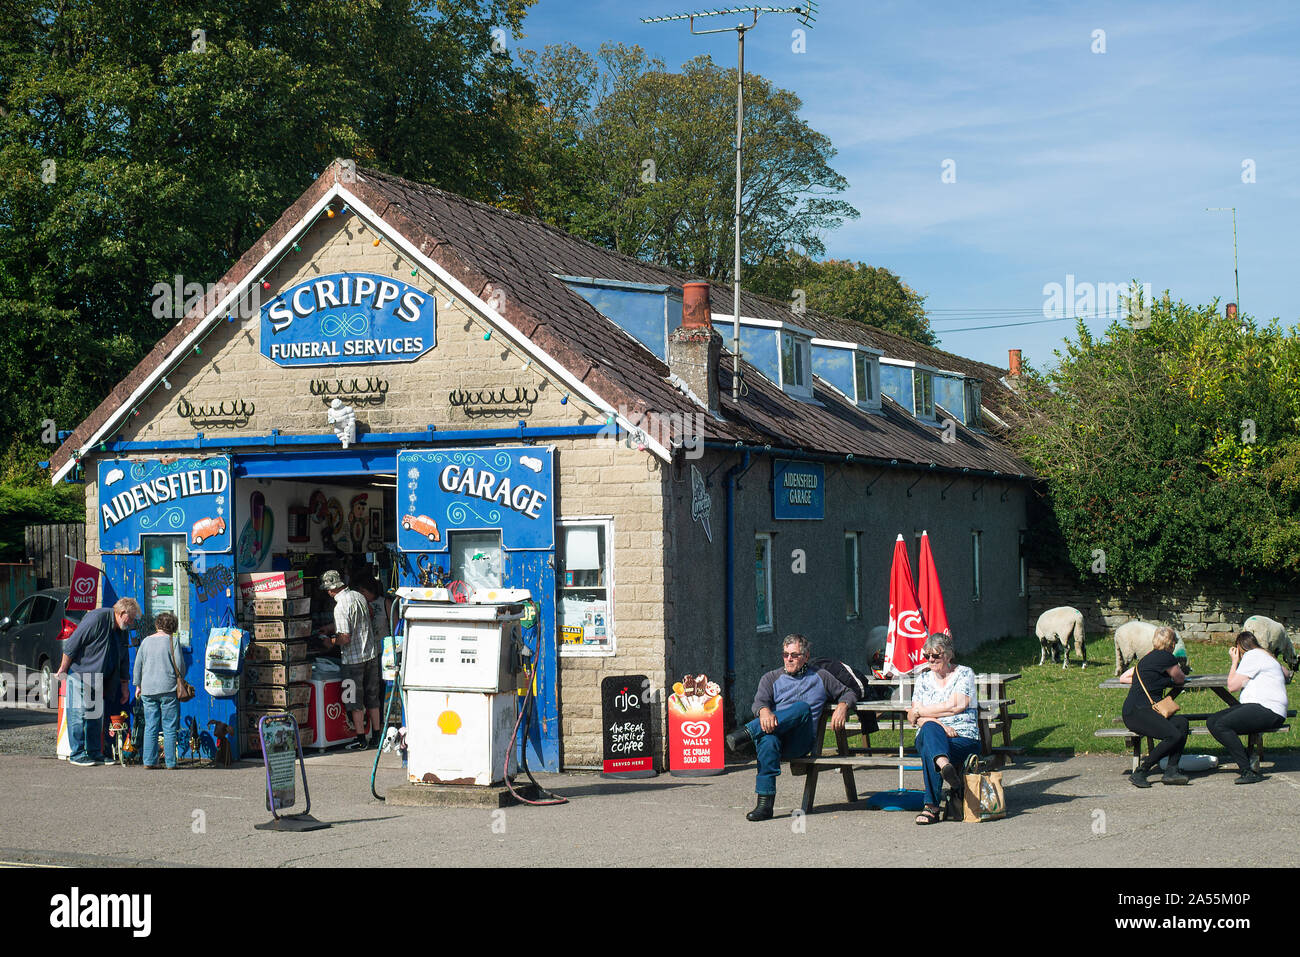 The Famous Aidensfield Garage Featured in Heartbeat Television Soap Opera in Goathland North Yorkshire England United Gingdom UK Stock Photo